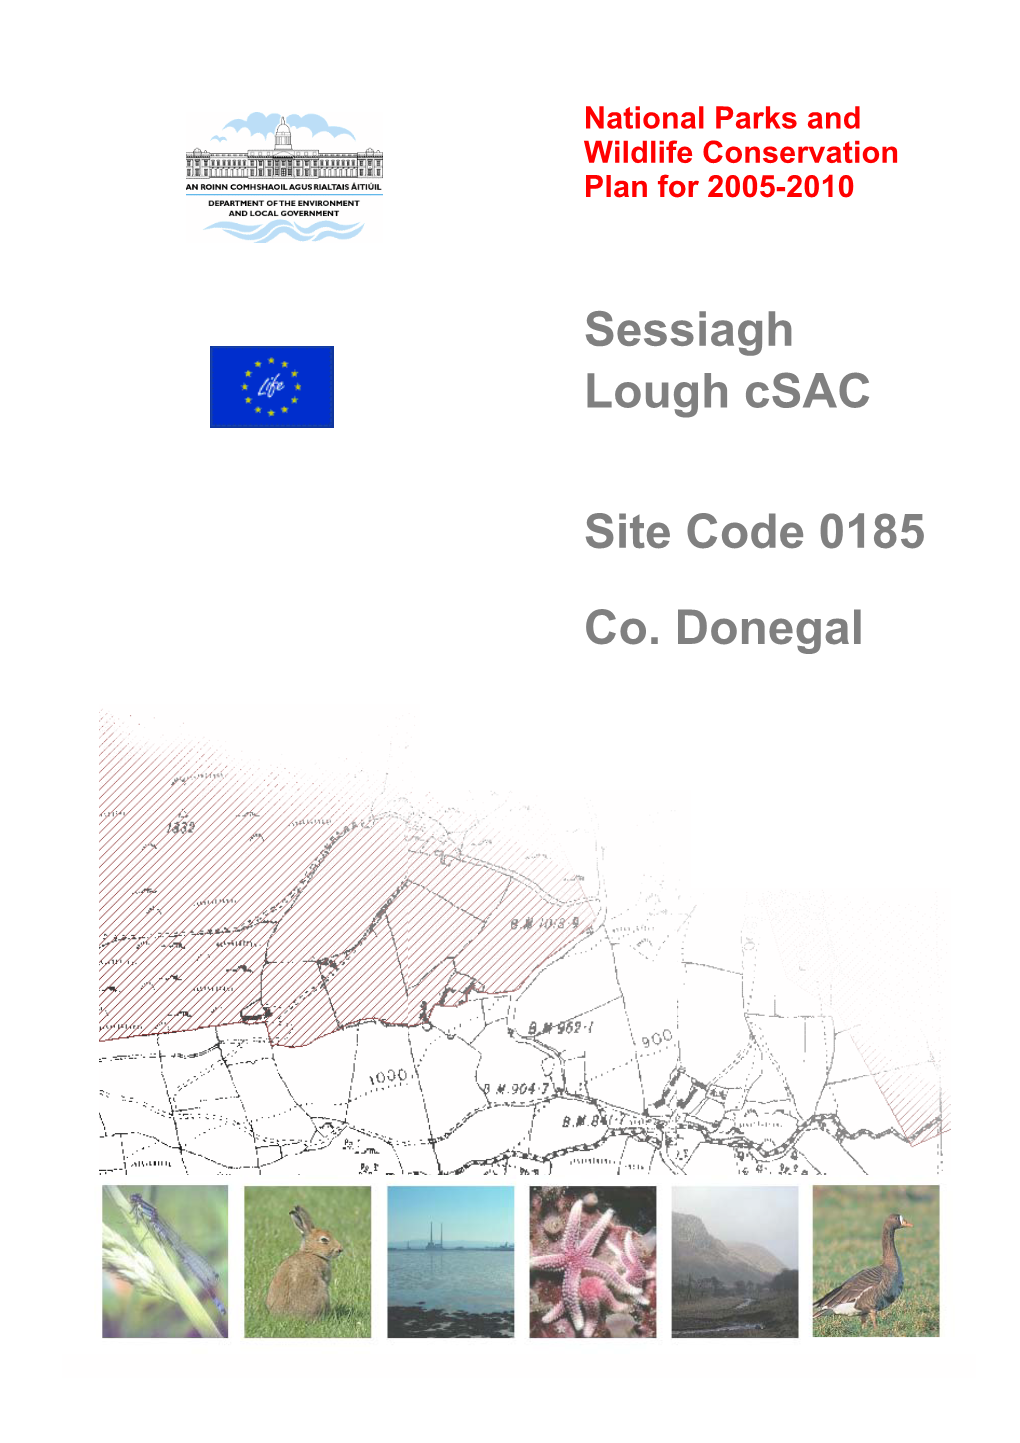 Sessiagh Lough Csac Site Code 0185 Co. Donegal